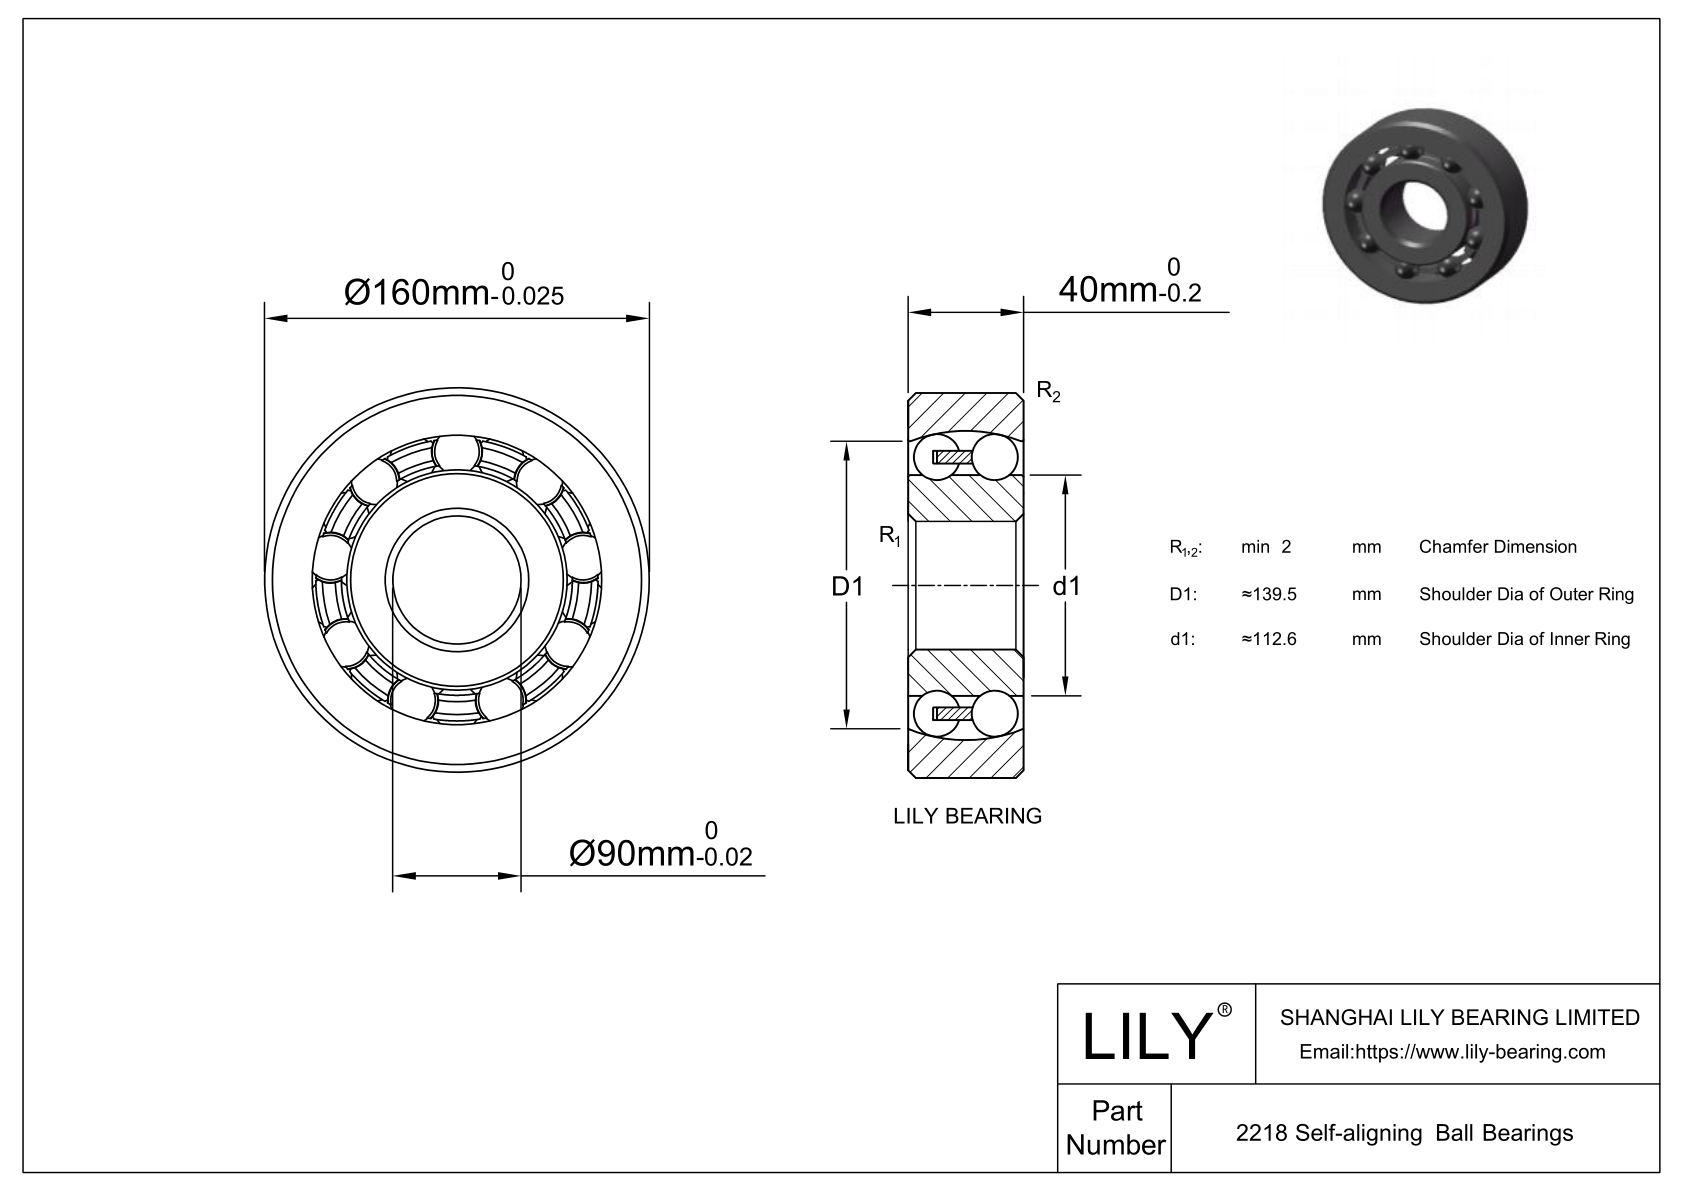 S2218 Stainless Steel Self Aligning Ball Bearings cad drawing